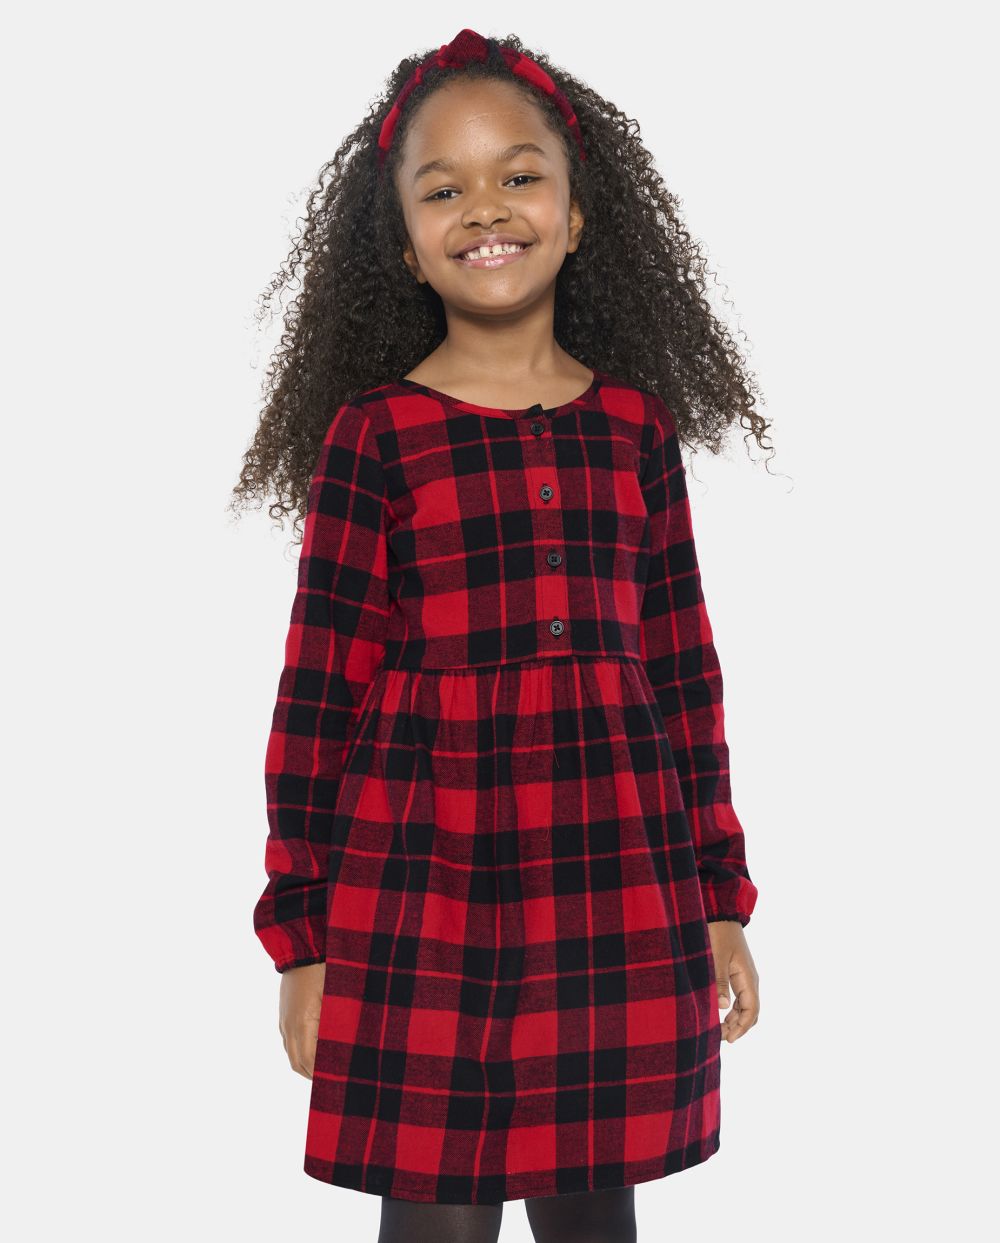 Girls Above the Knee Plaid Print Crew Neck Button Front Long Sleeves Shirt Dress